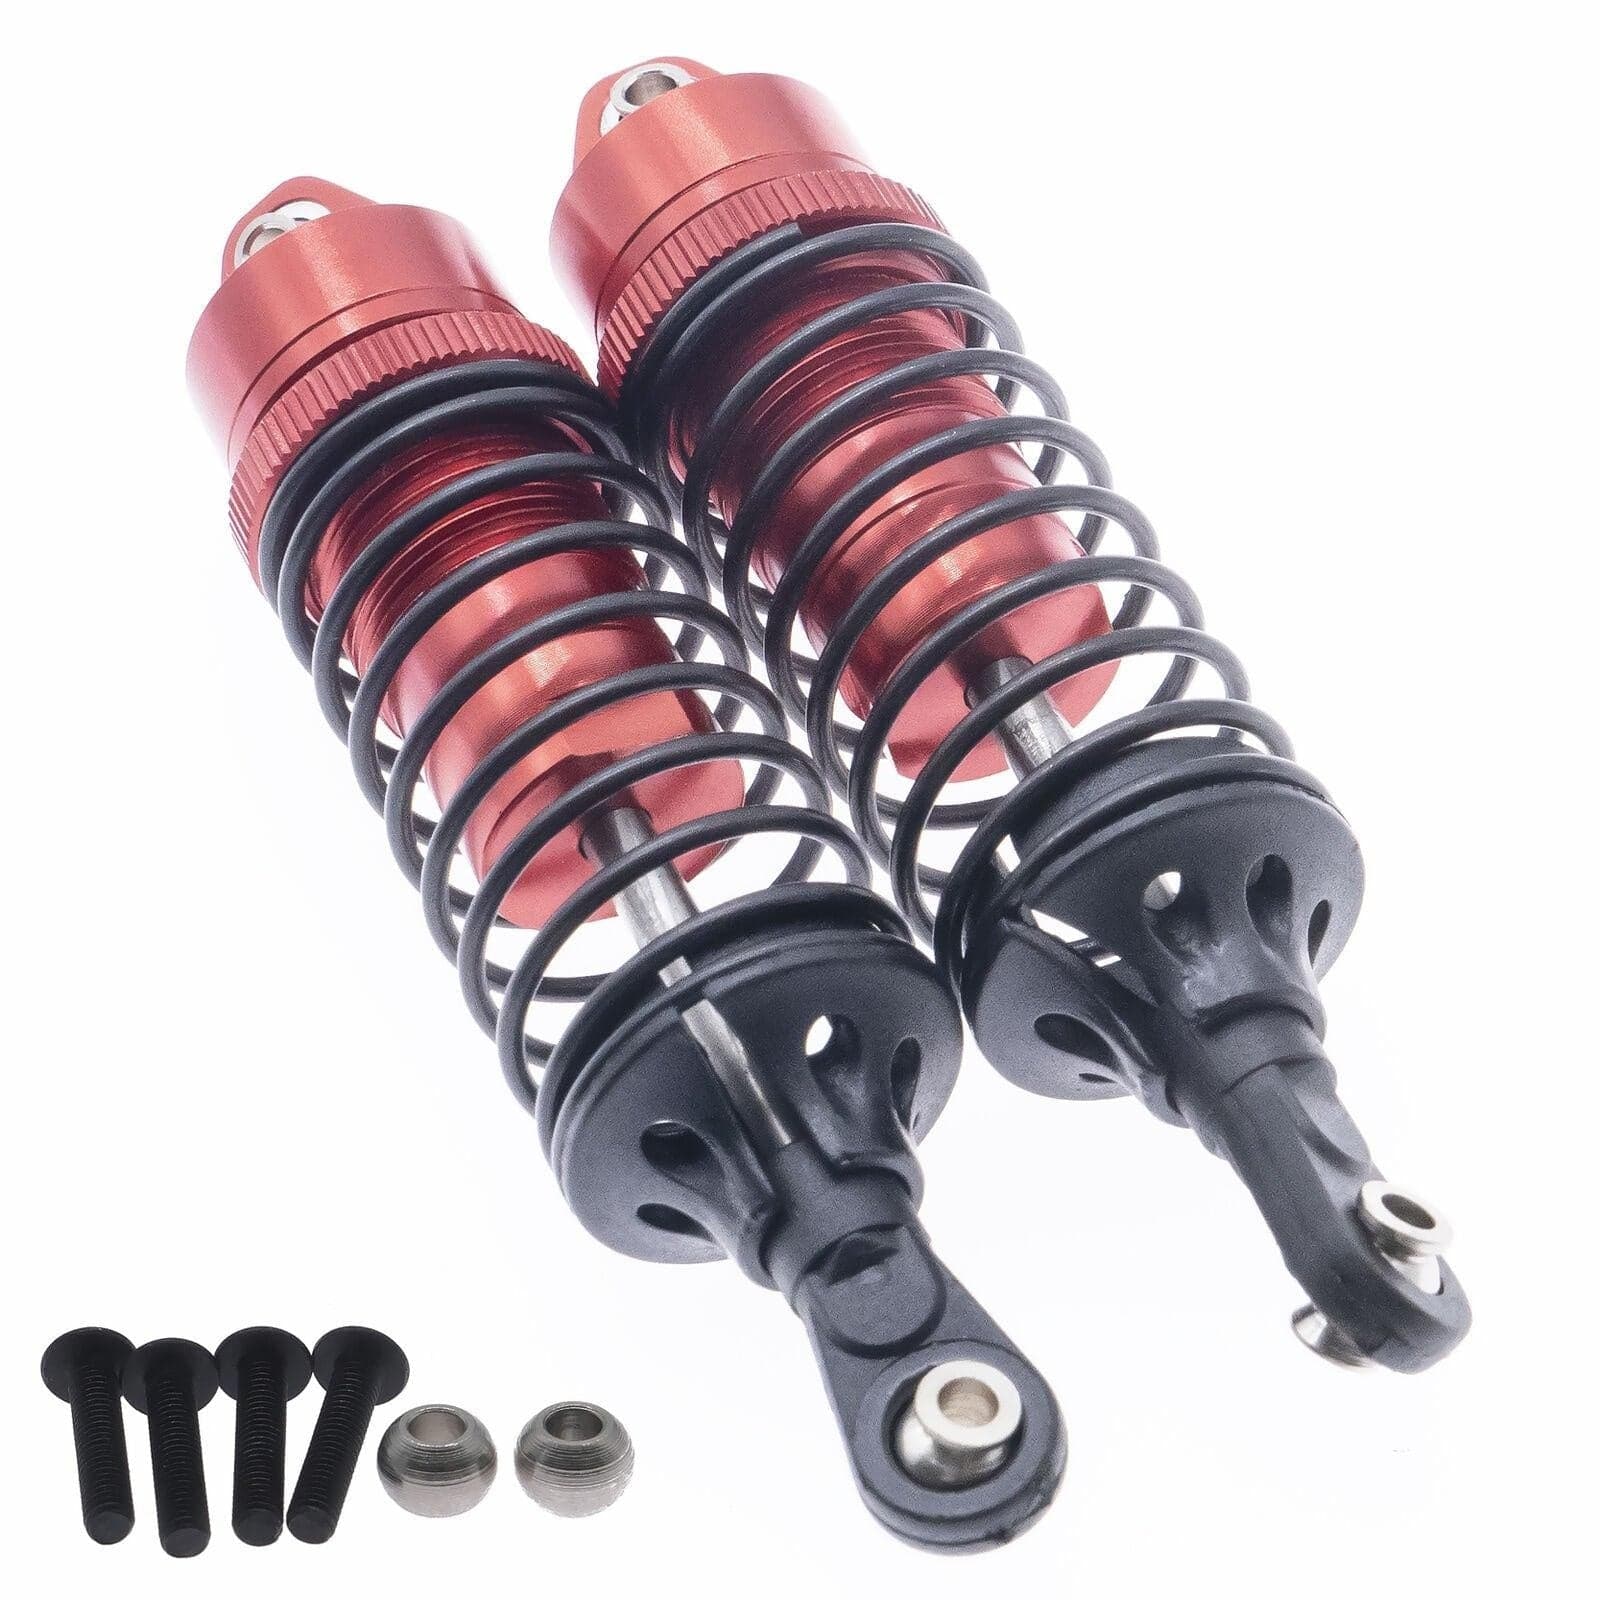 RCAWD ECX UPGRADE PARTS Red RCAWD Front Shock Absorber For RC Car 1/10 Horizon ECX 2WD Series Ruckus Axe MT